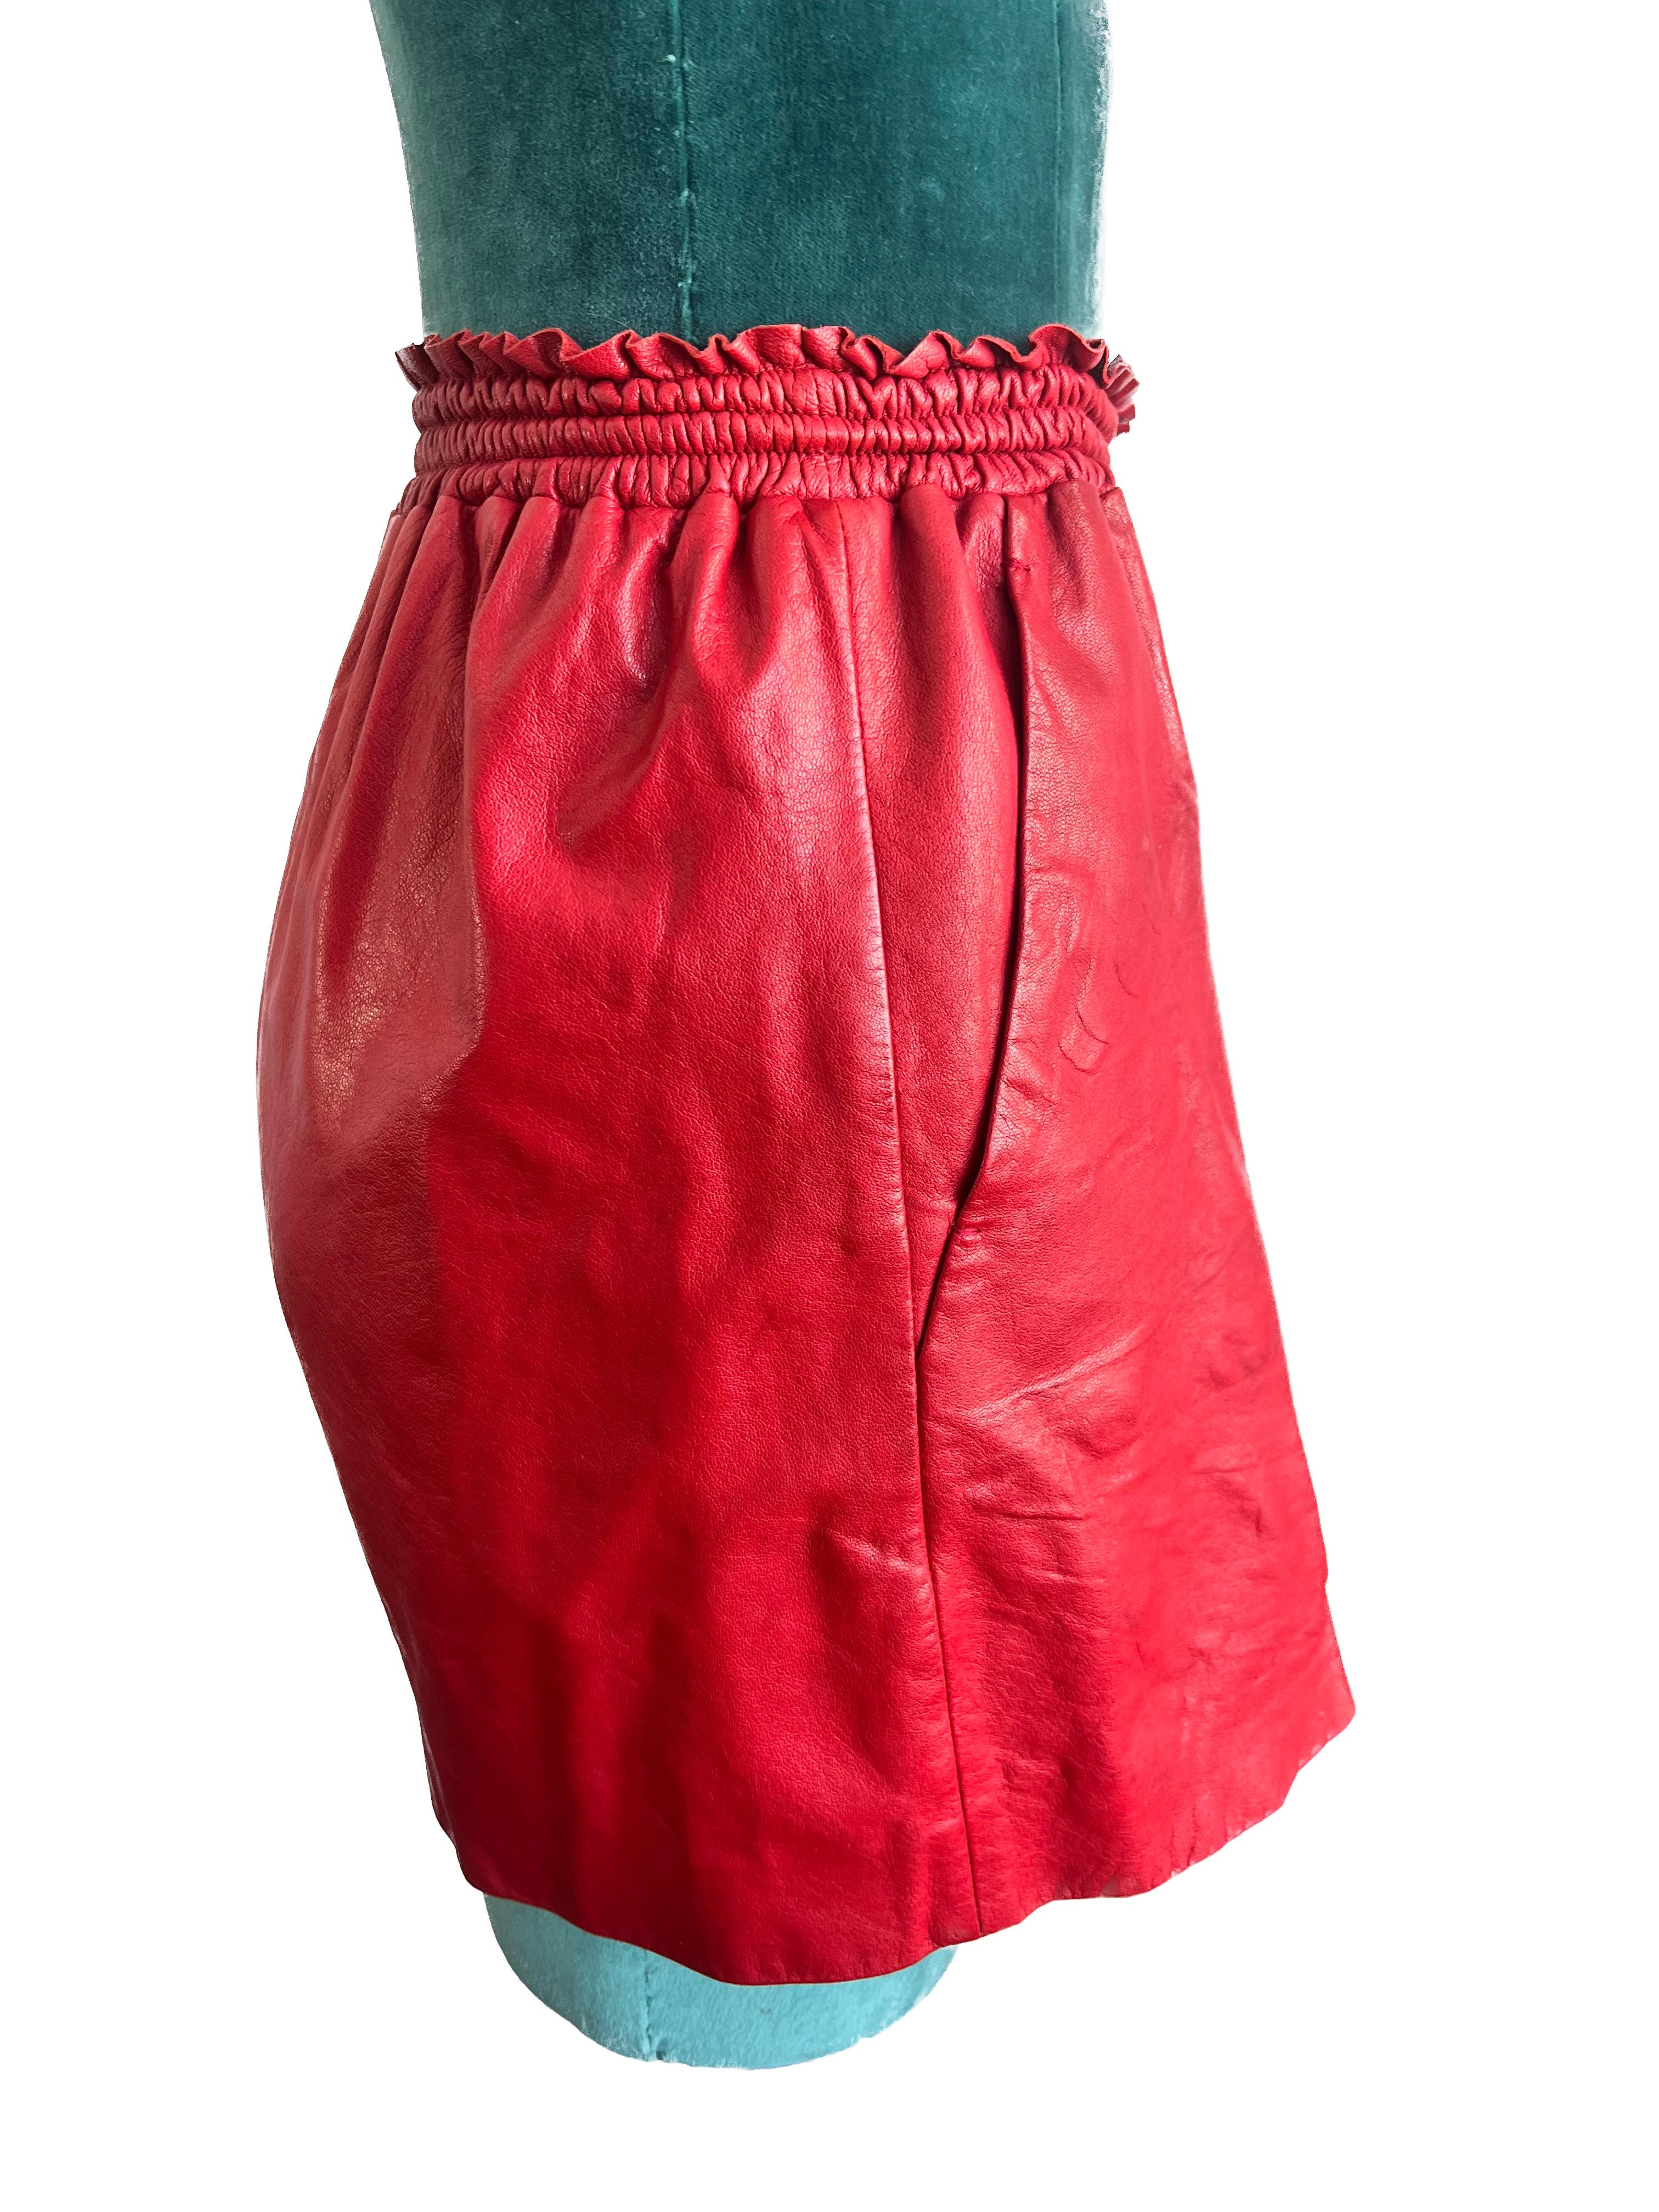 
Elevate your style quotient to new heights with the Miu Miu red lamb skin leather shorts, a testament to the art of luxurious dressing. Impeccably crafted from the finest lamb leather, these shorts offer an unparalleled level of softness that is